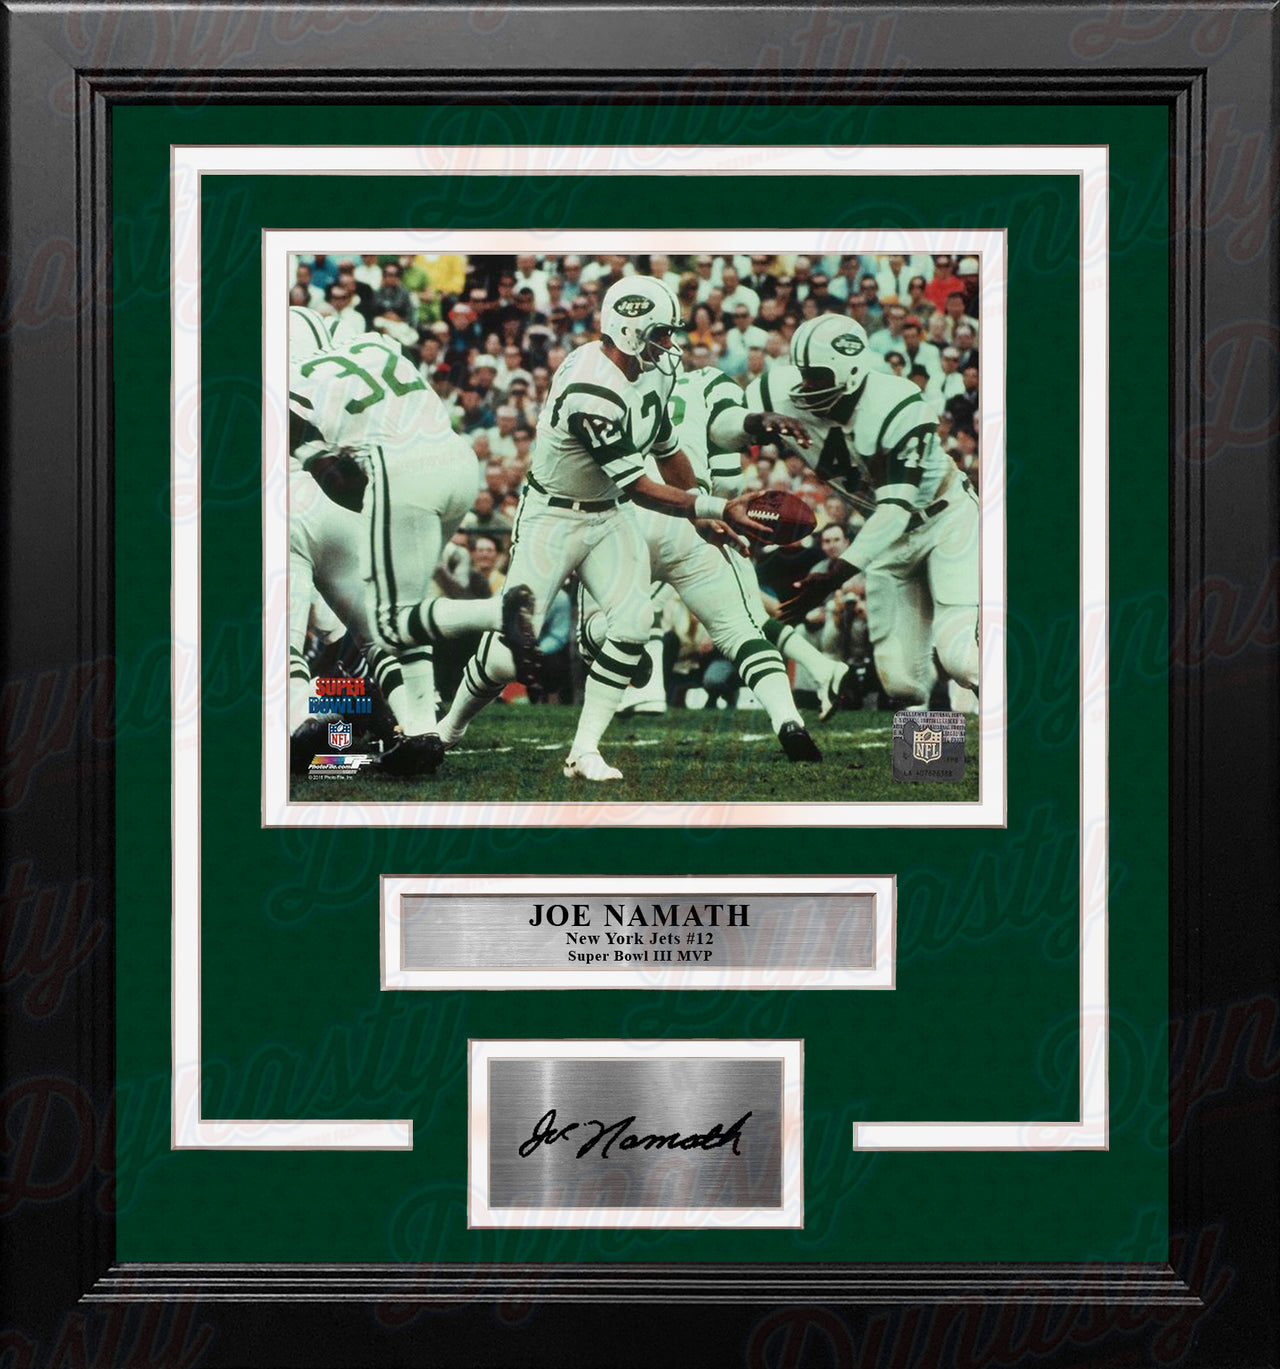 Joe Namath Super Bowl III Action New York Jets 8x10 Framed Football Photo with Engraved Autograph - Dynasty Sports & Framing 